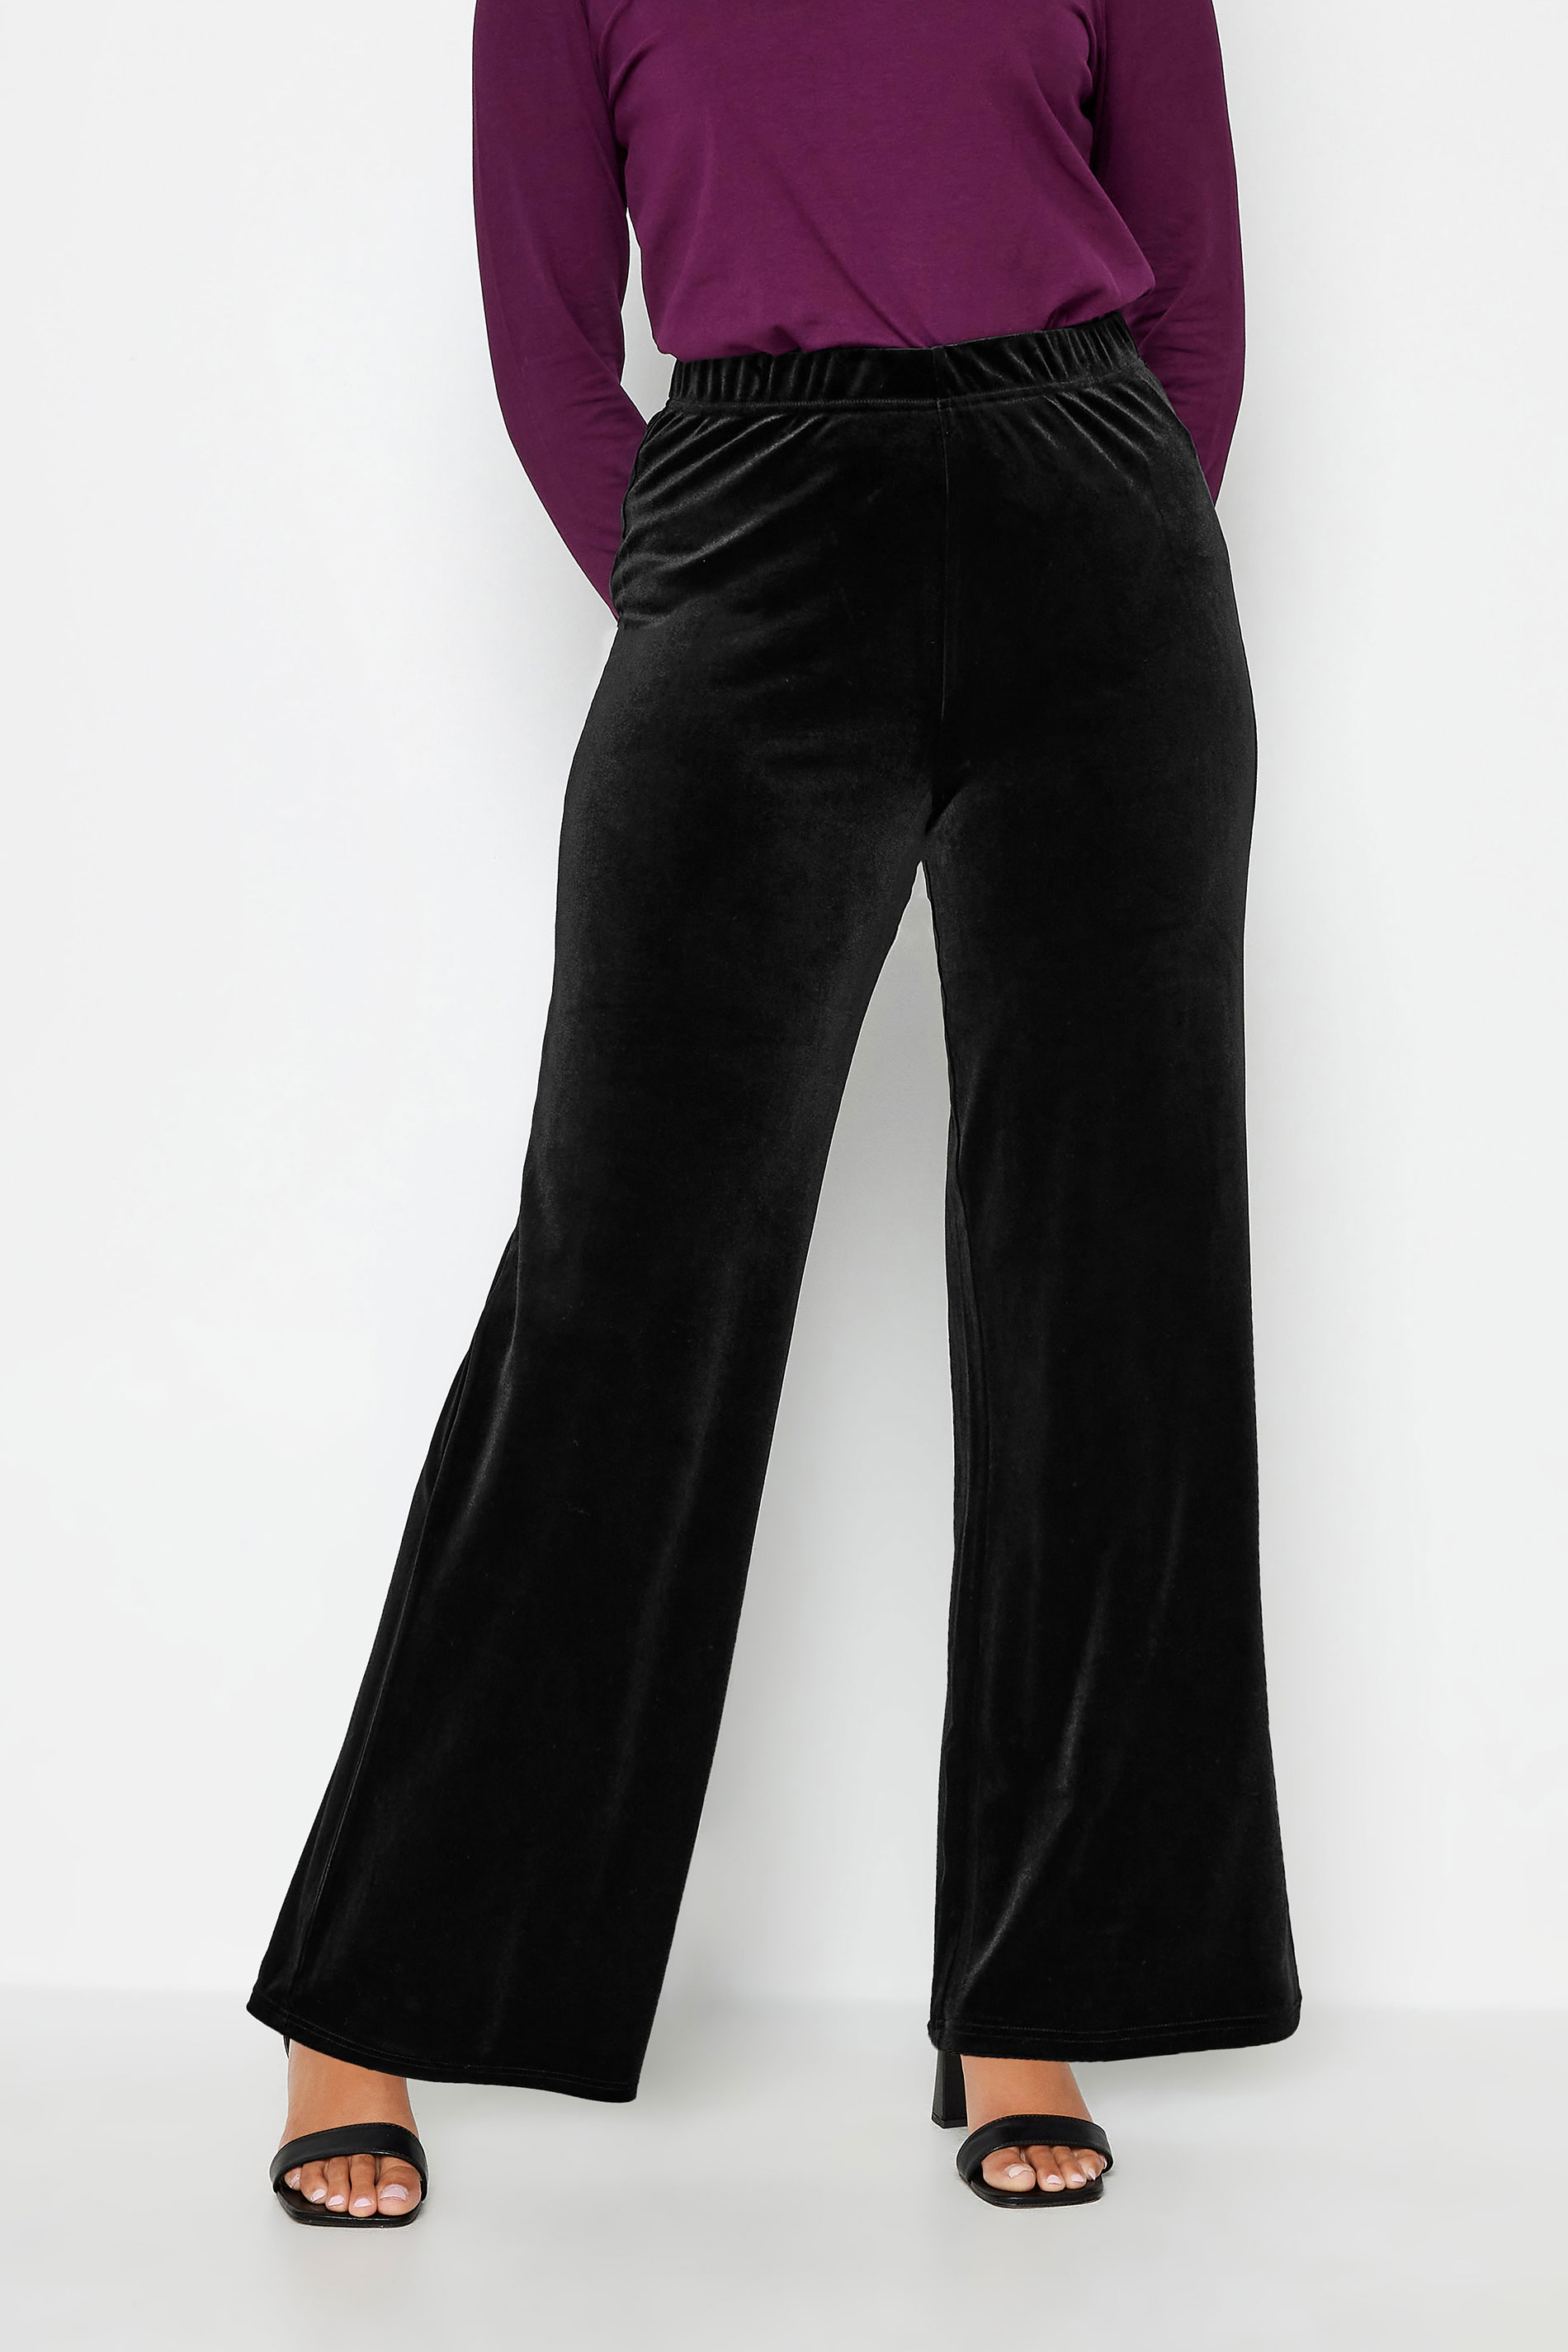 Women Ladies Casual Crushed Velvet High Waist Flare Pants Bell Bottoms  Trousers | eBay